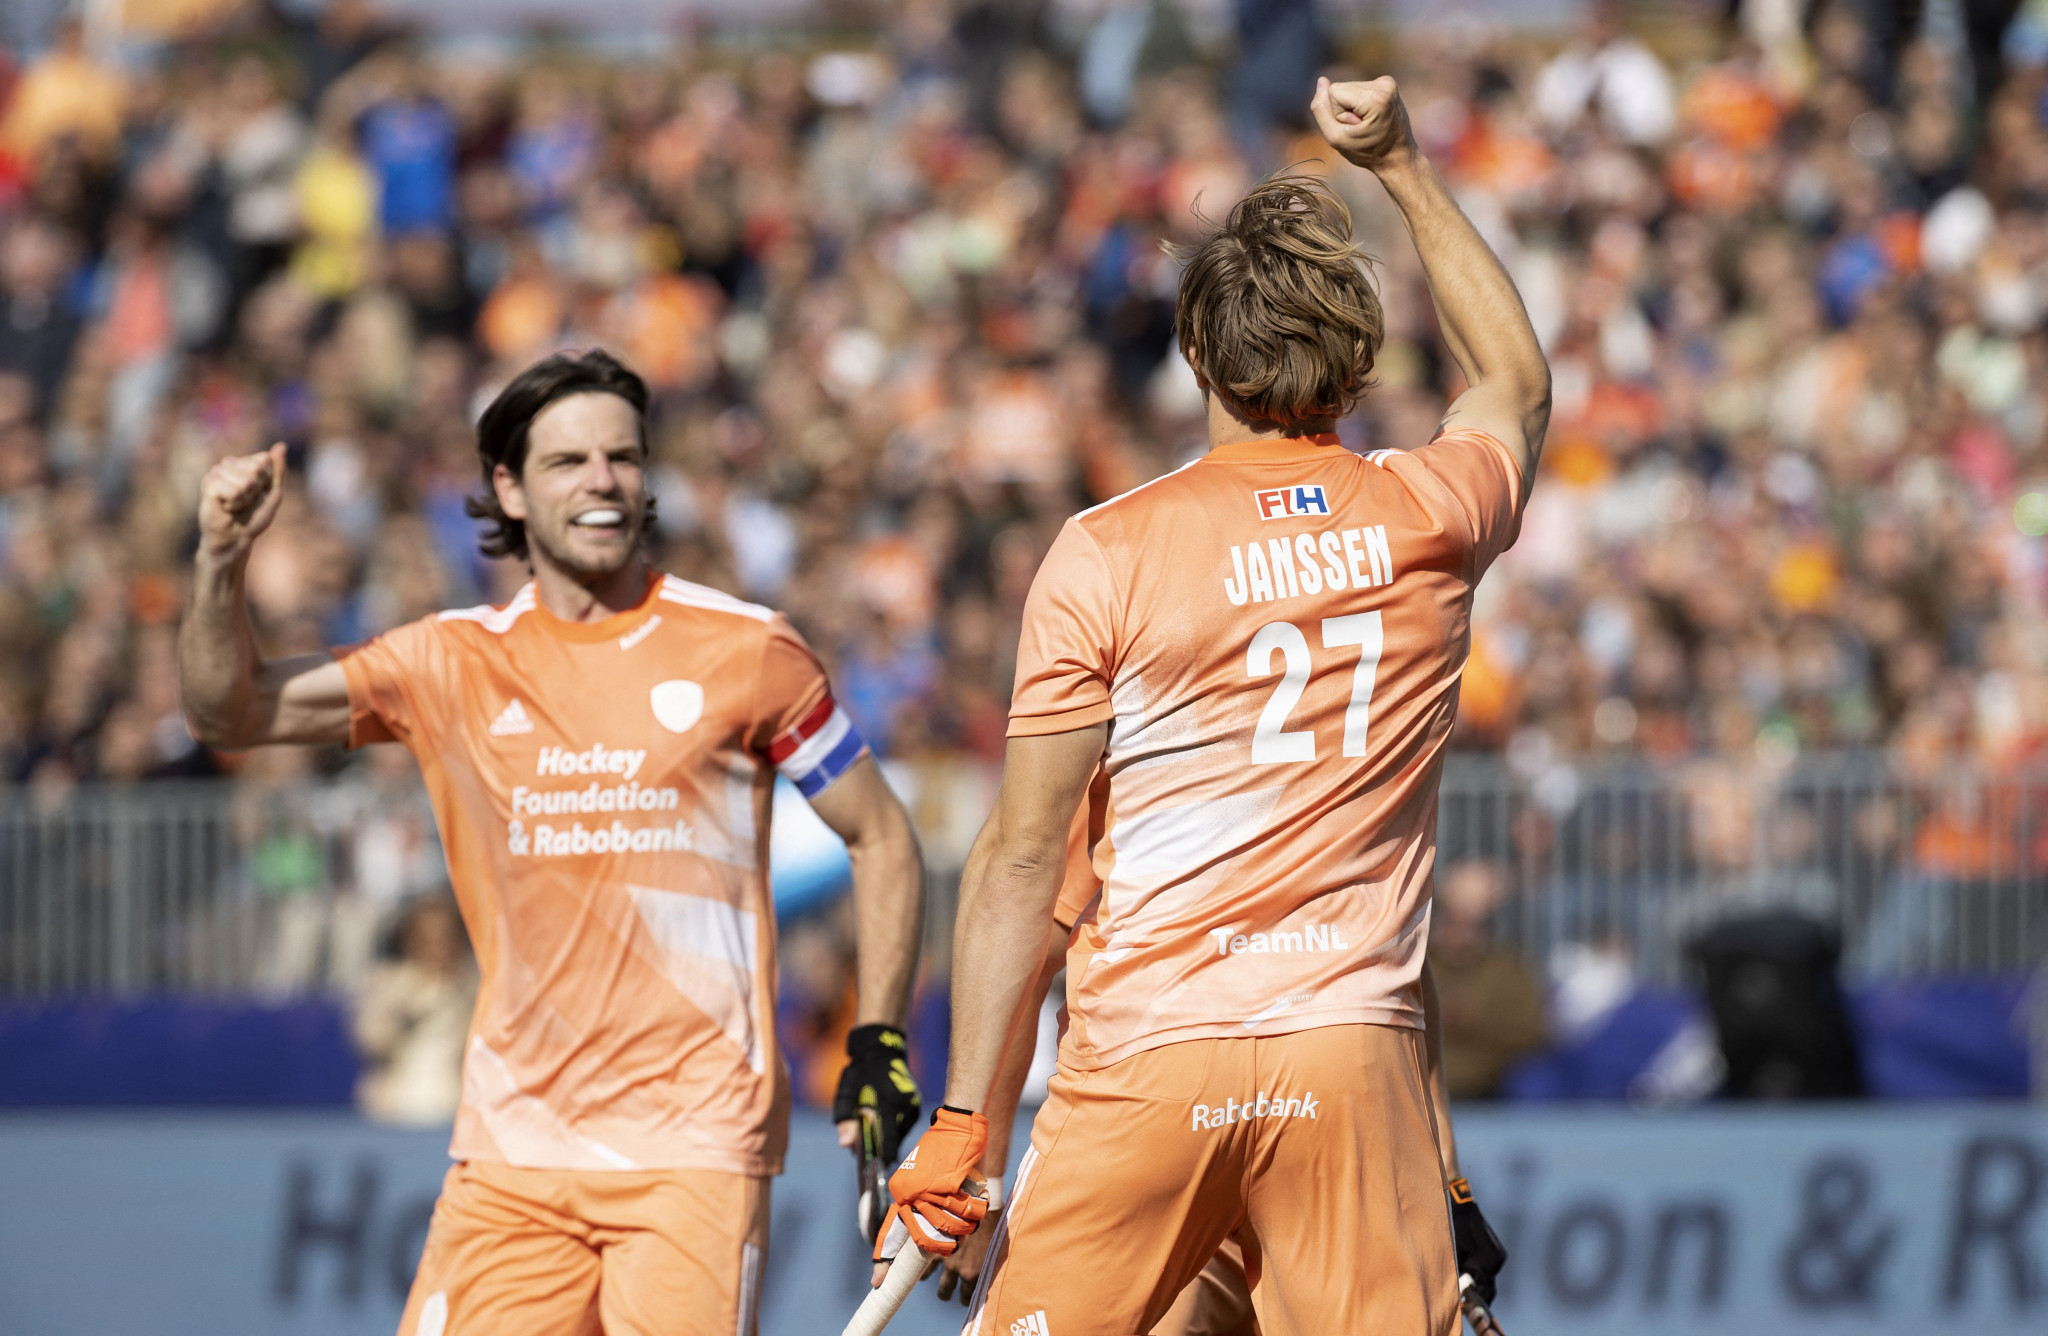 The Netherlands will hope to seal the Men's Hockey Pro League title this weekend ©Getty Images